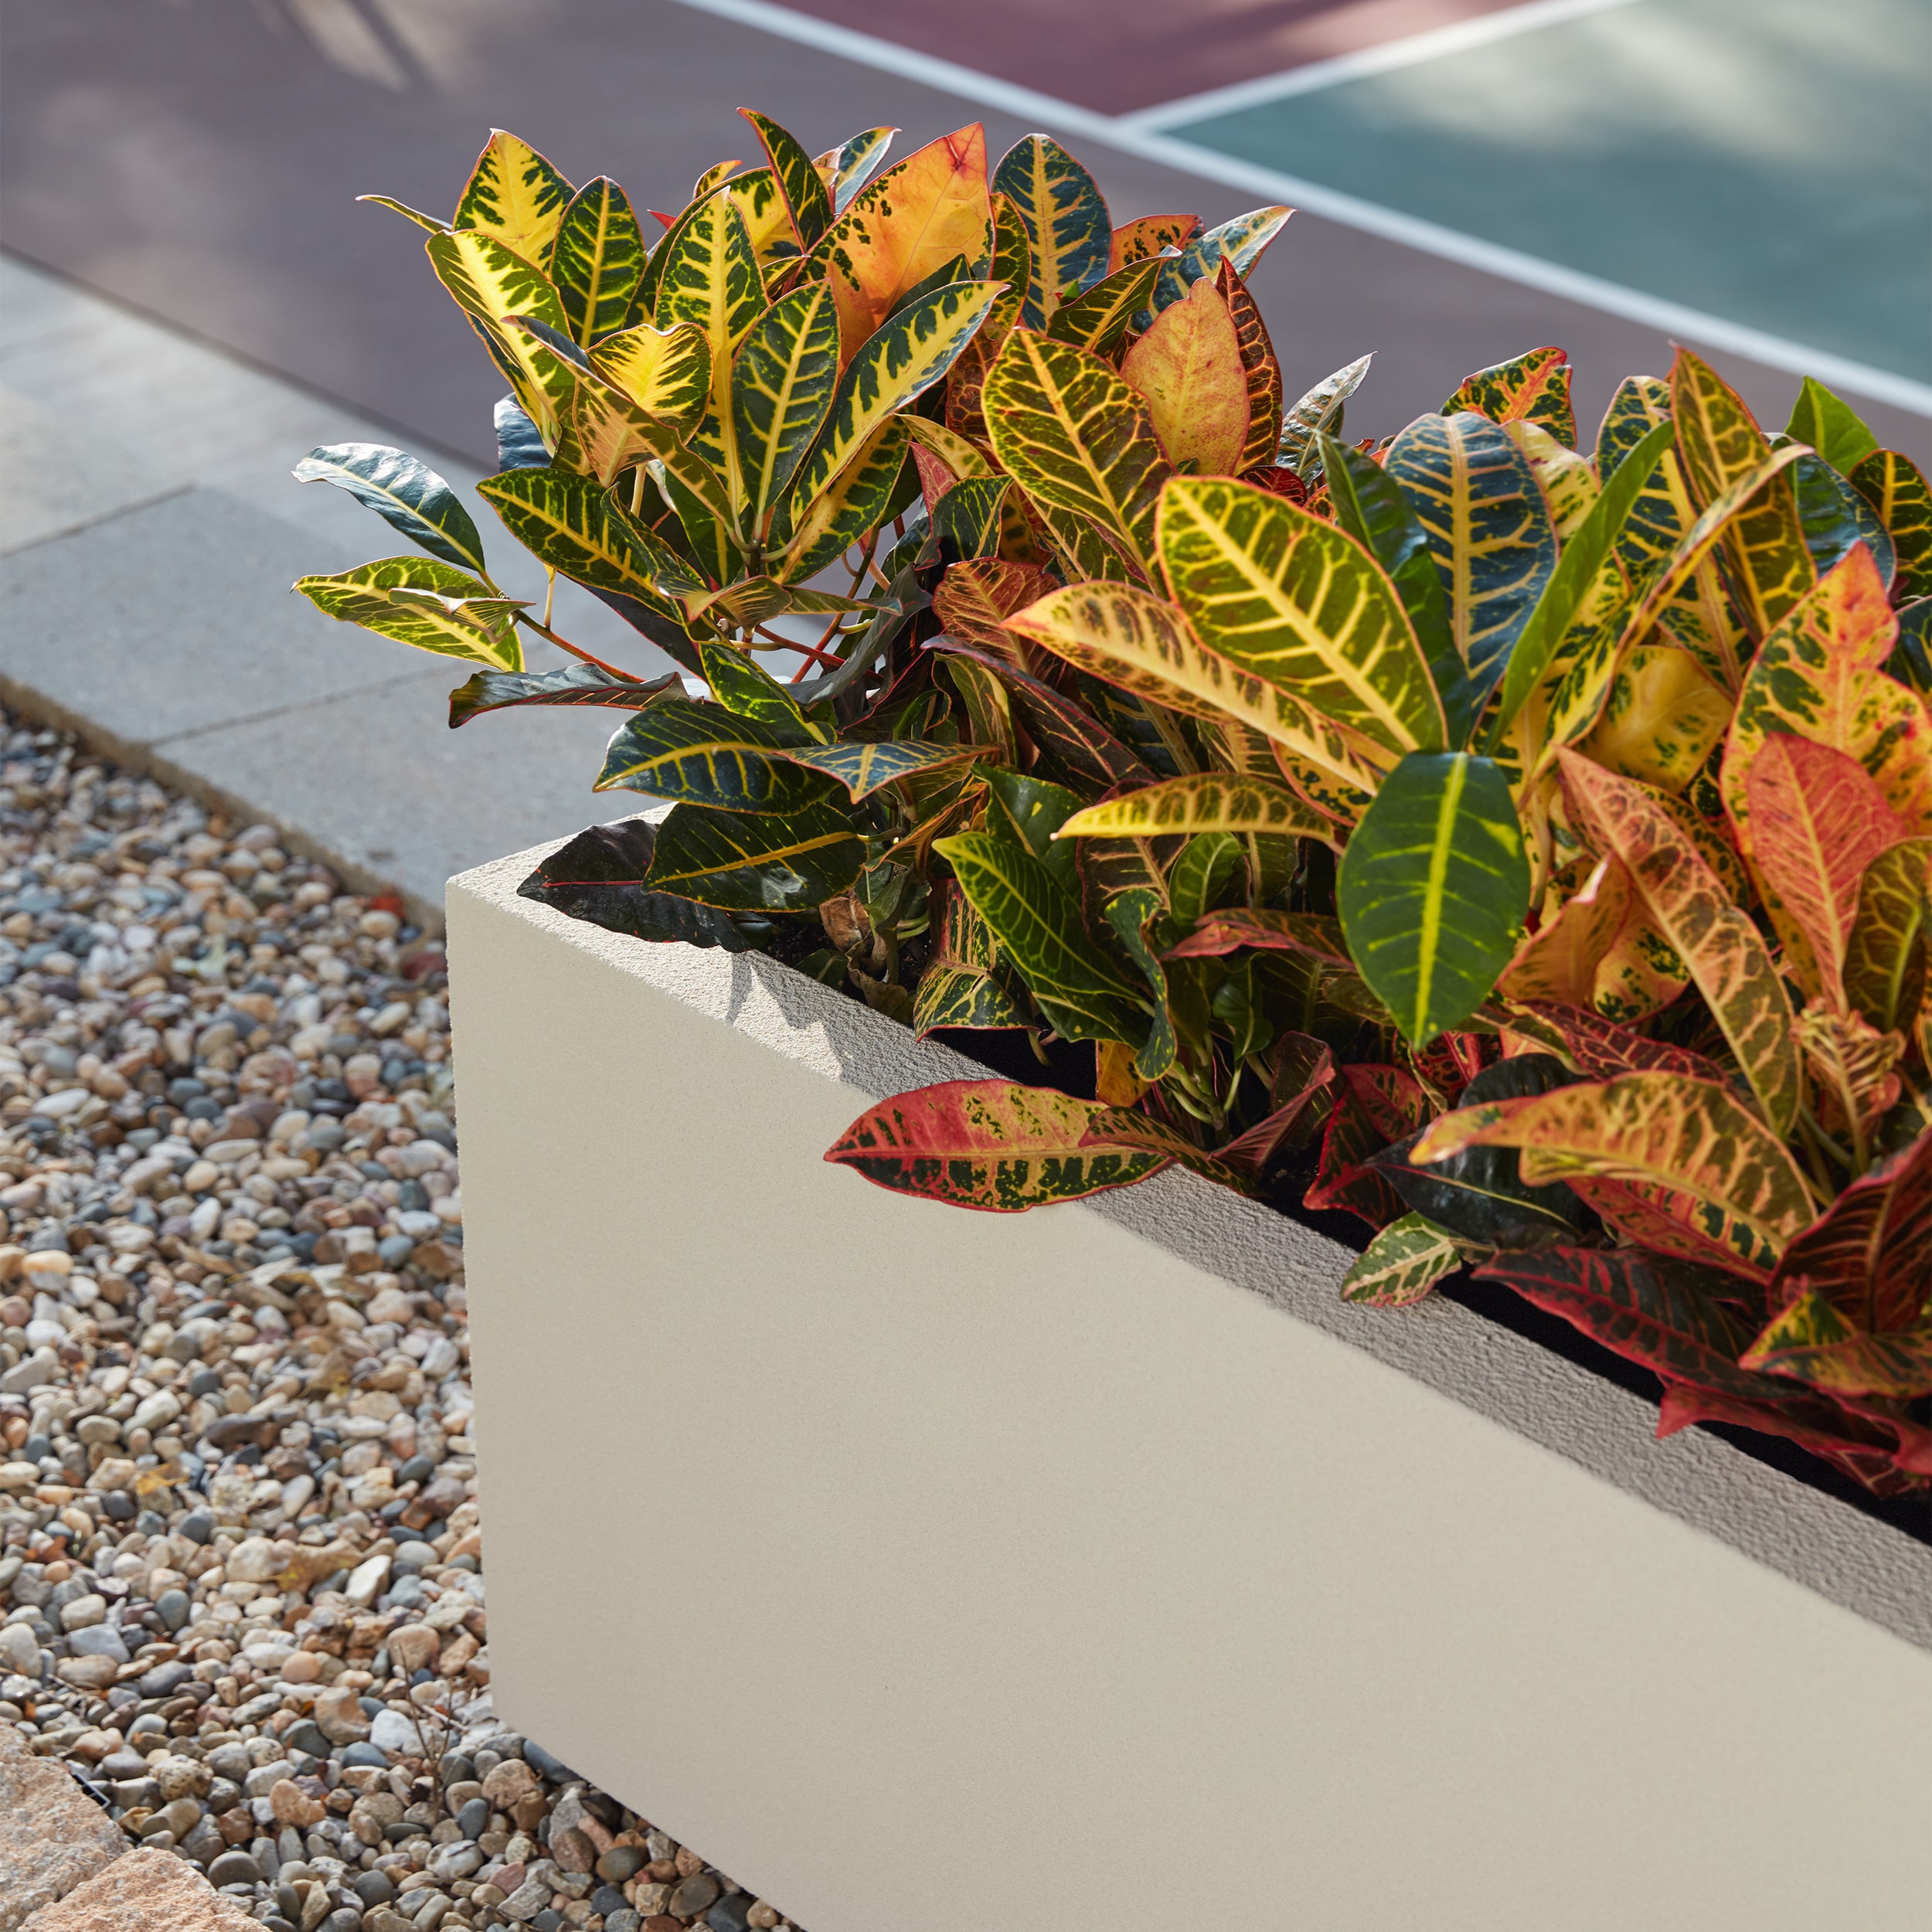 Decorating Small Spaces with Planters — PolyStone Planters